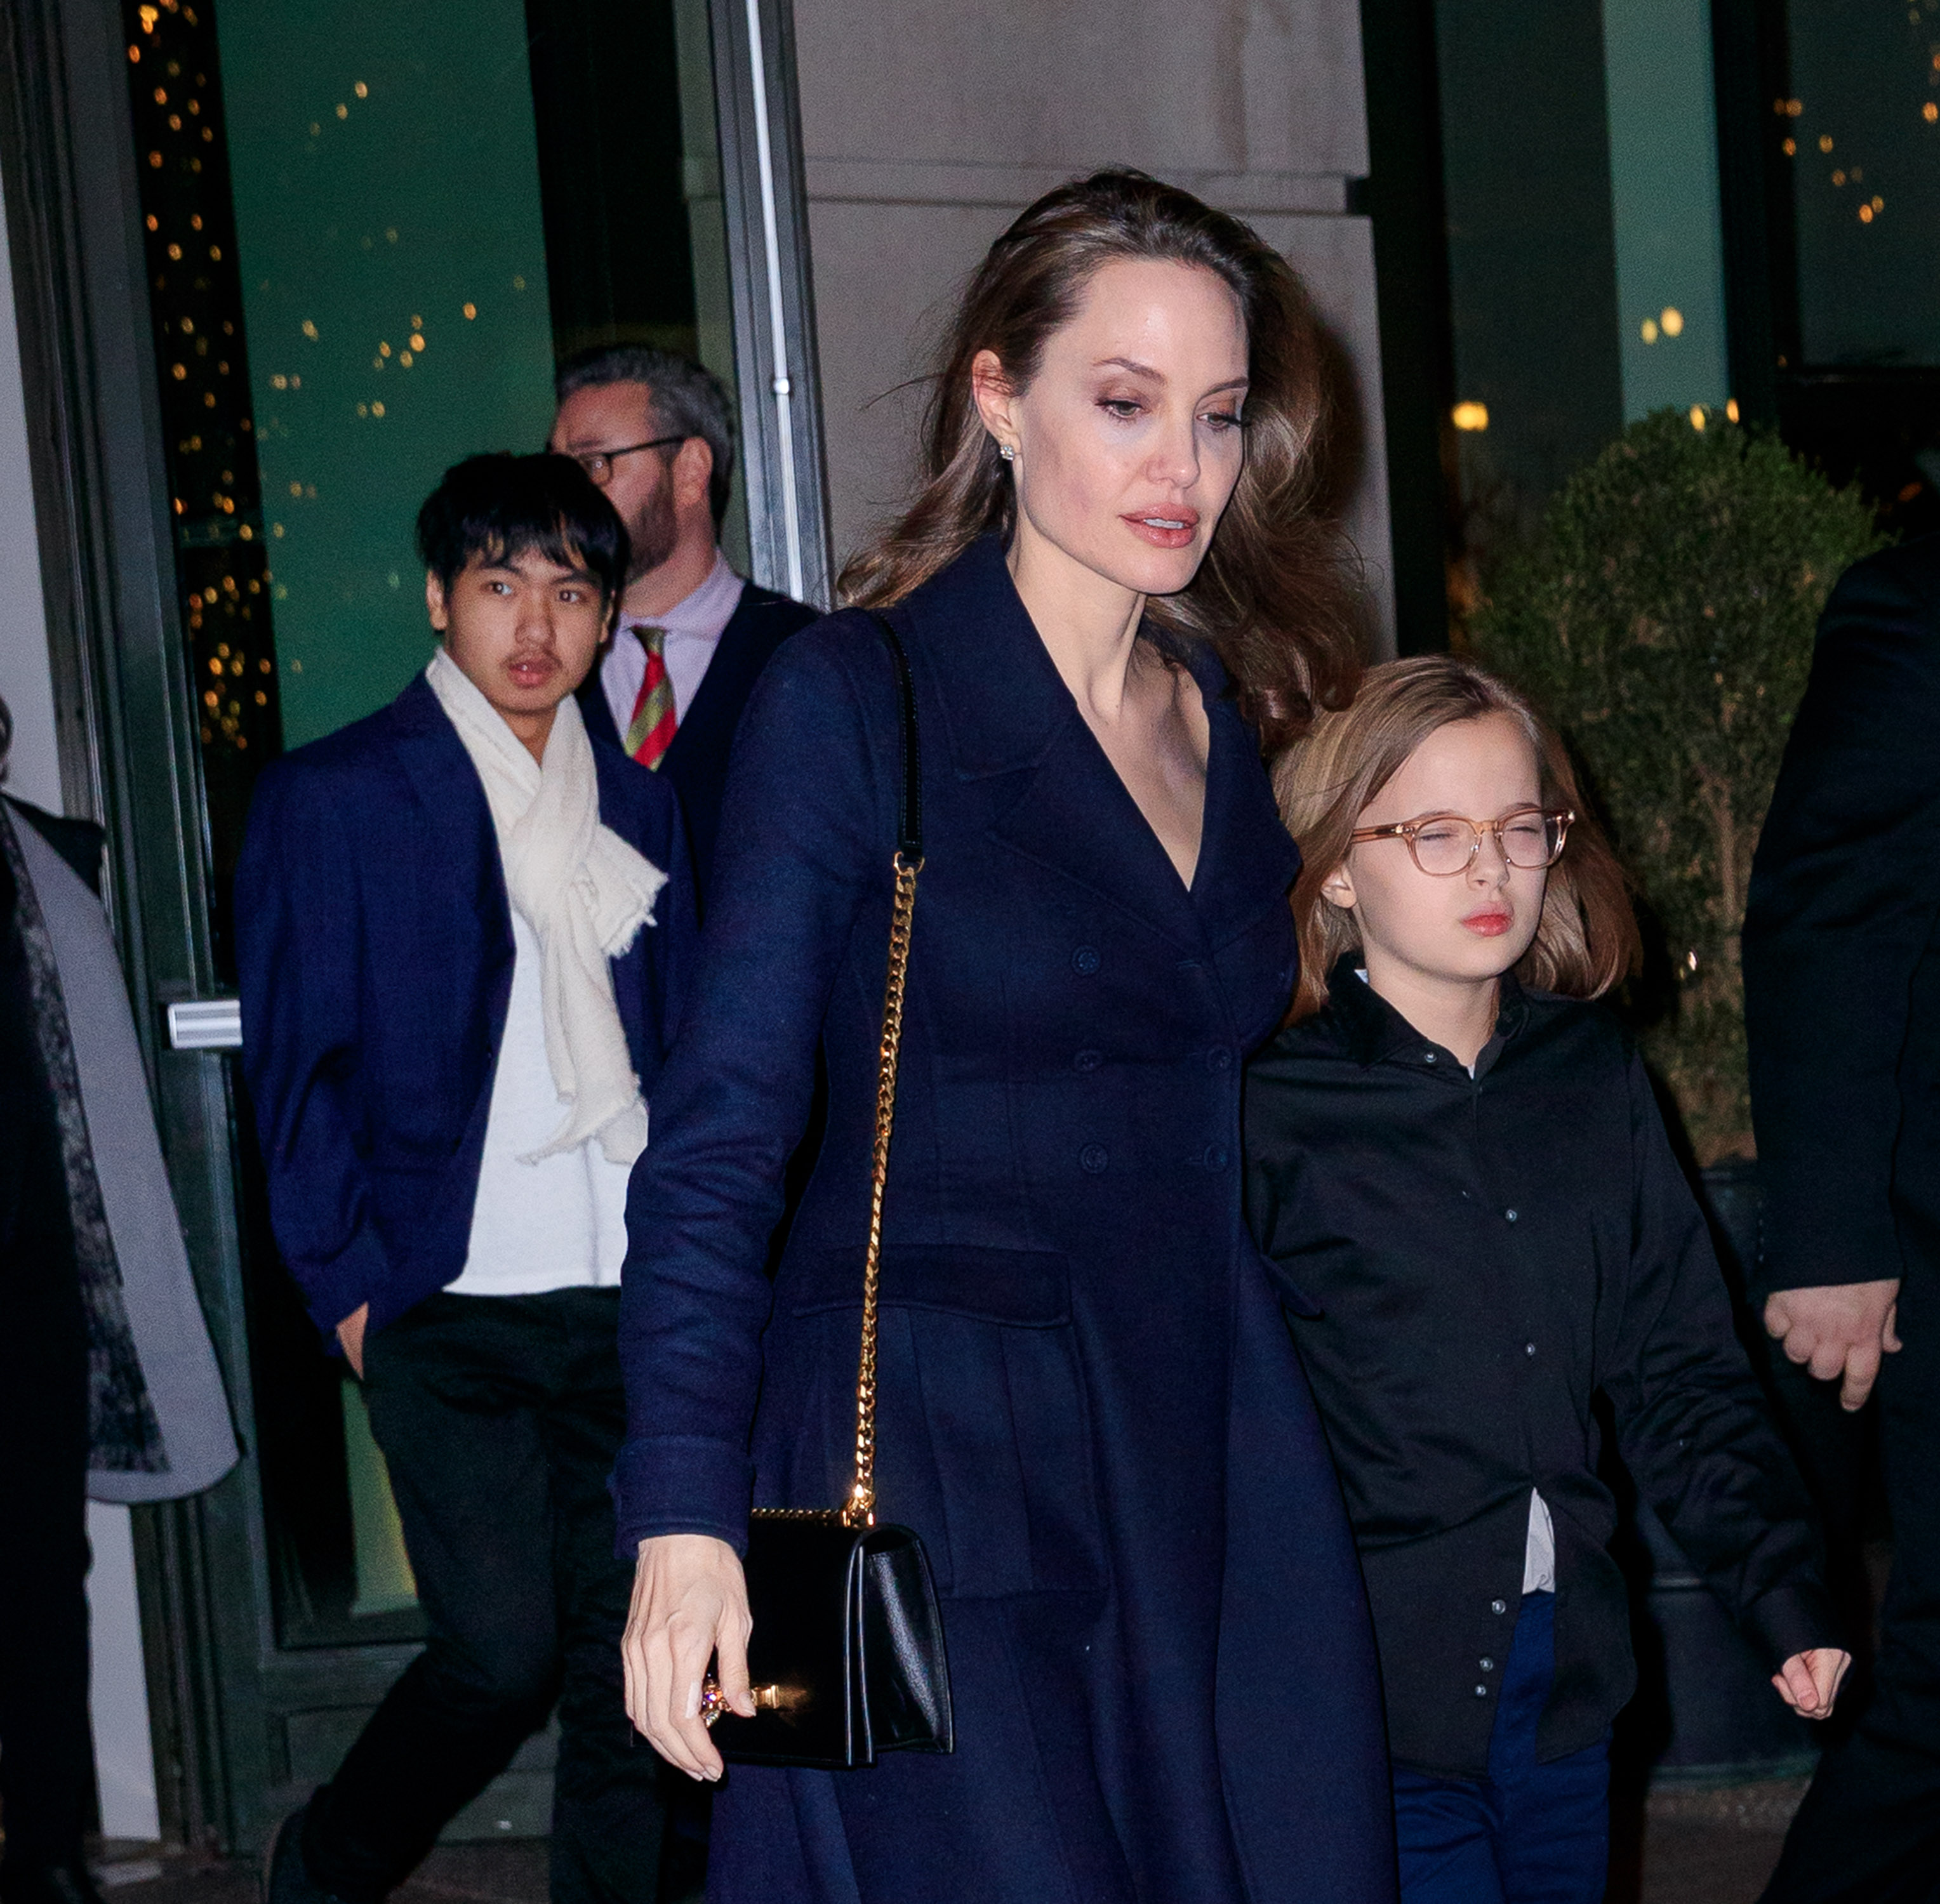 Angelina Jolie and Vivienne Jolie-Pitt seen in New York City on February 25, 2019 | Source: Getty Images